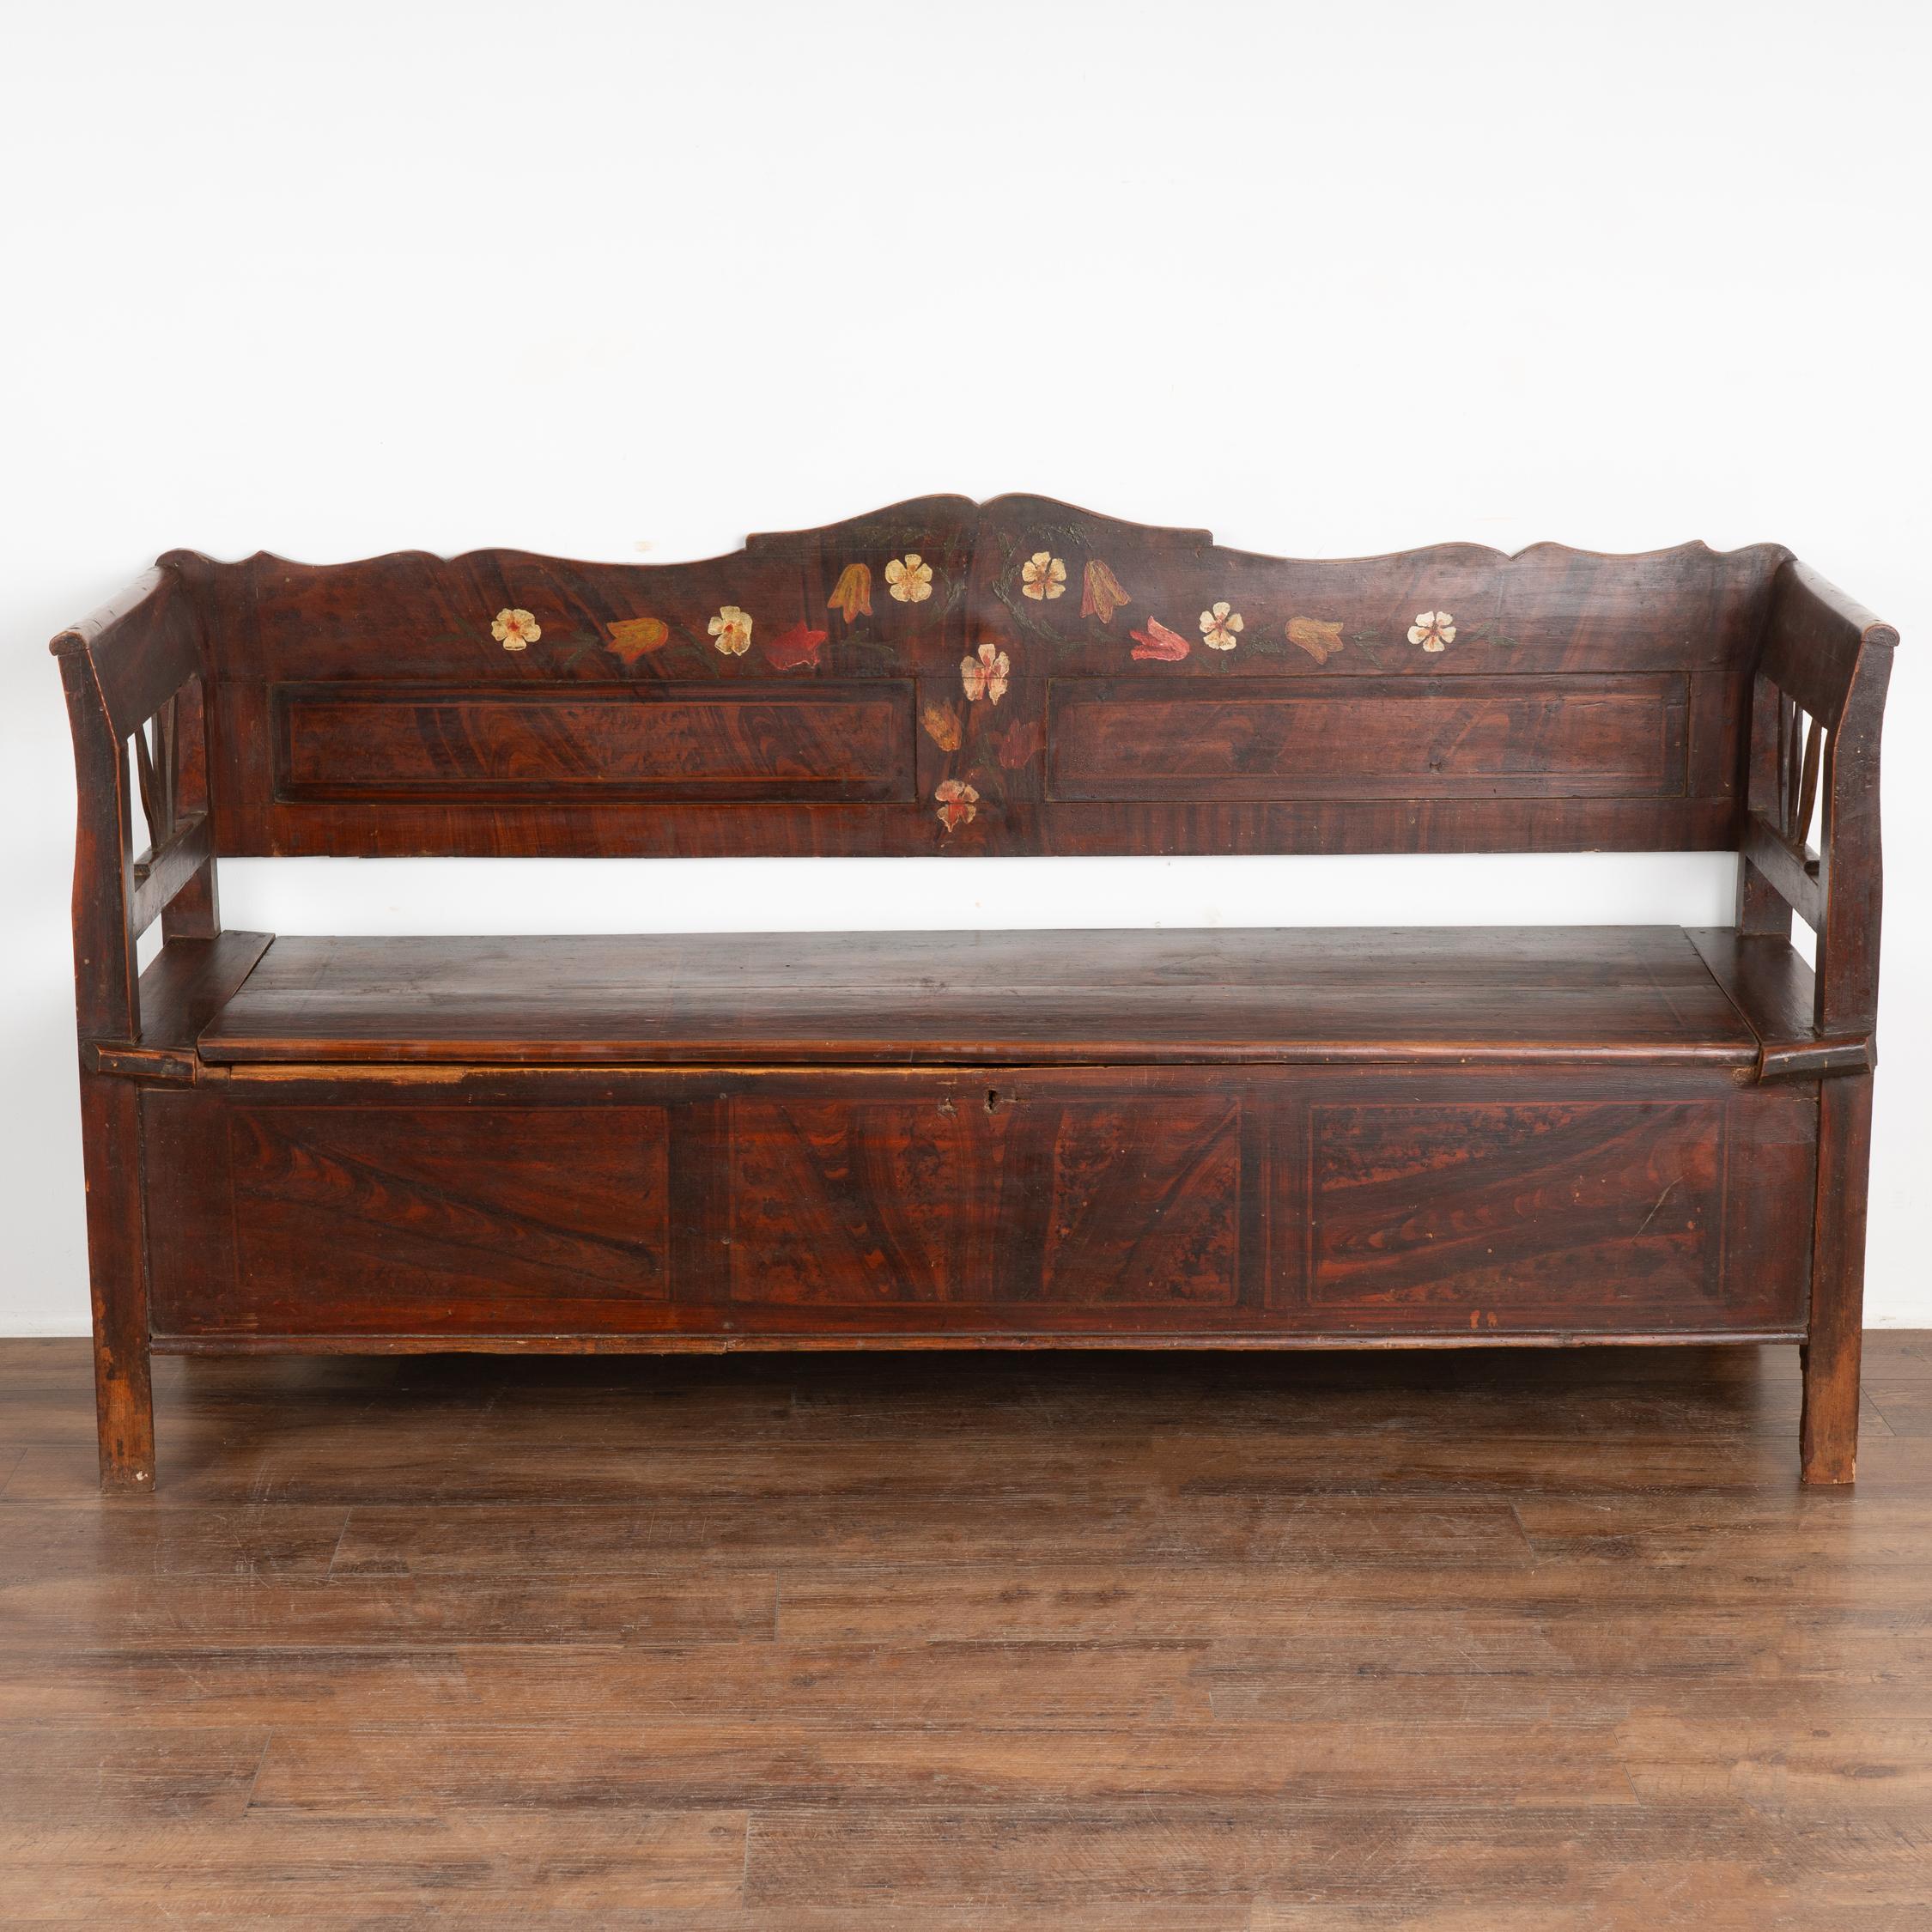 Hungarian Original Painted Brown Bench With Storage, Hungary Circa 1900's For Sale